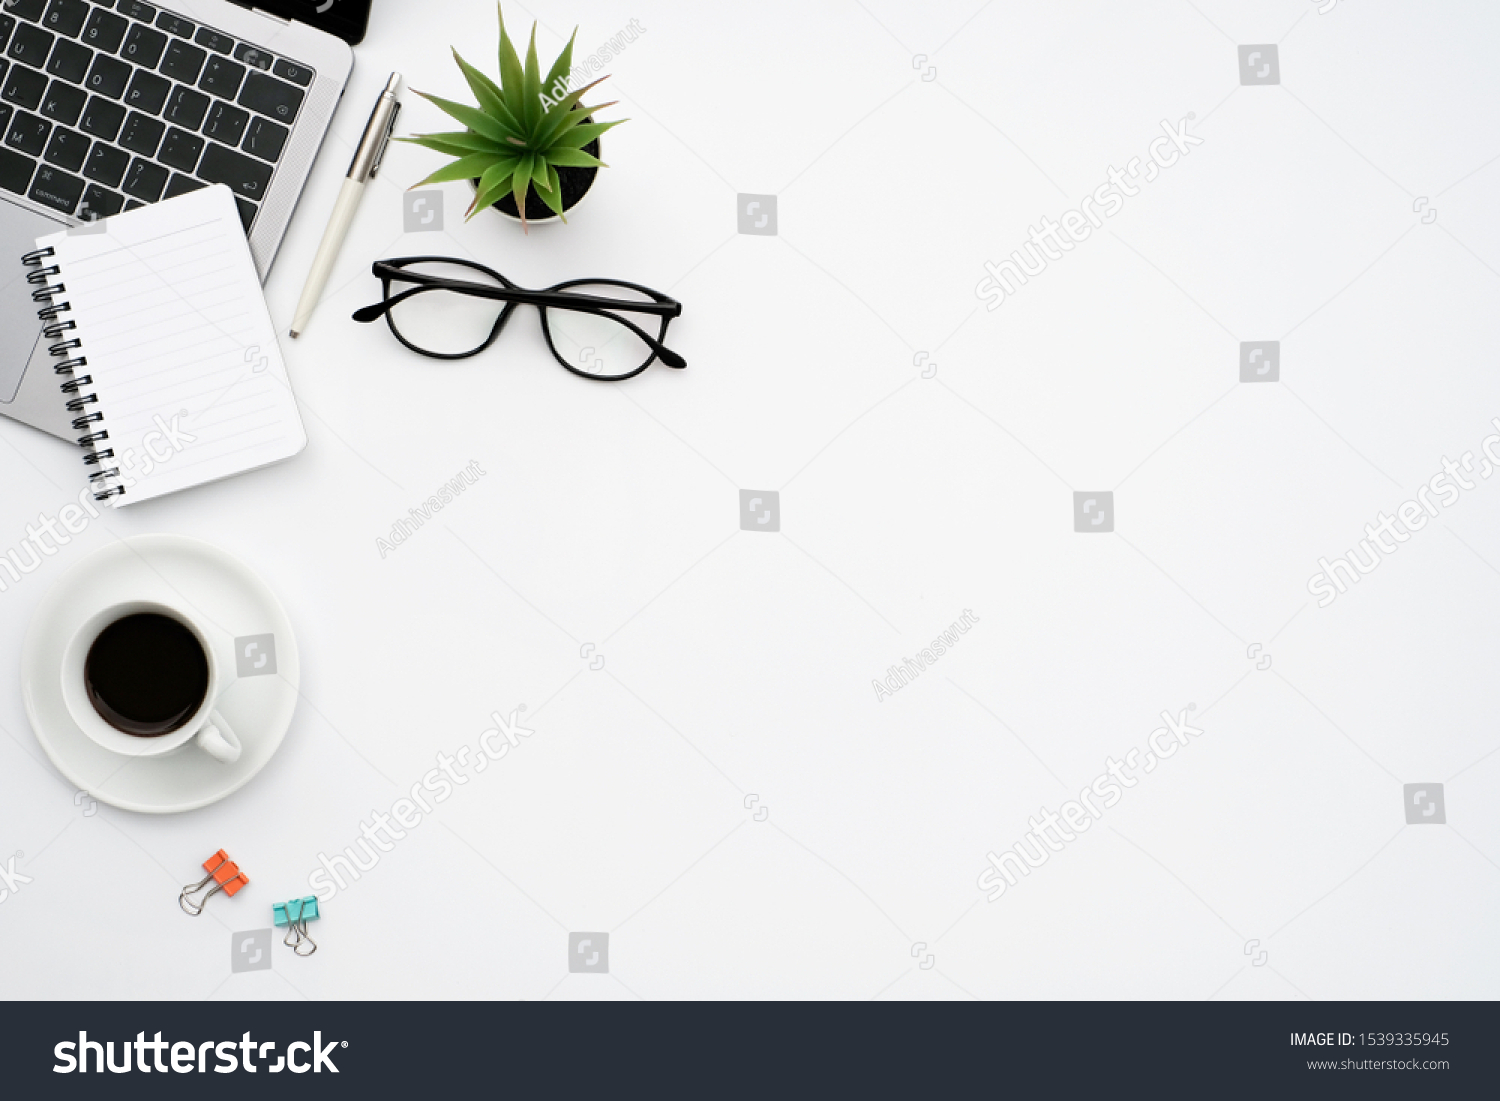 Work space office business and finance concept on white table desk background with laptop computer and coffee cup, green plant and glasses, Top view with copy space, flat lay #1539335945